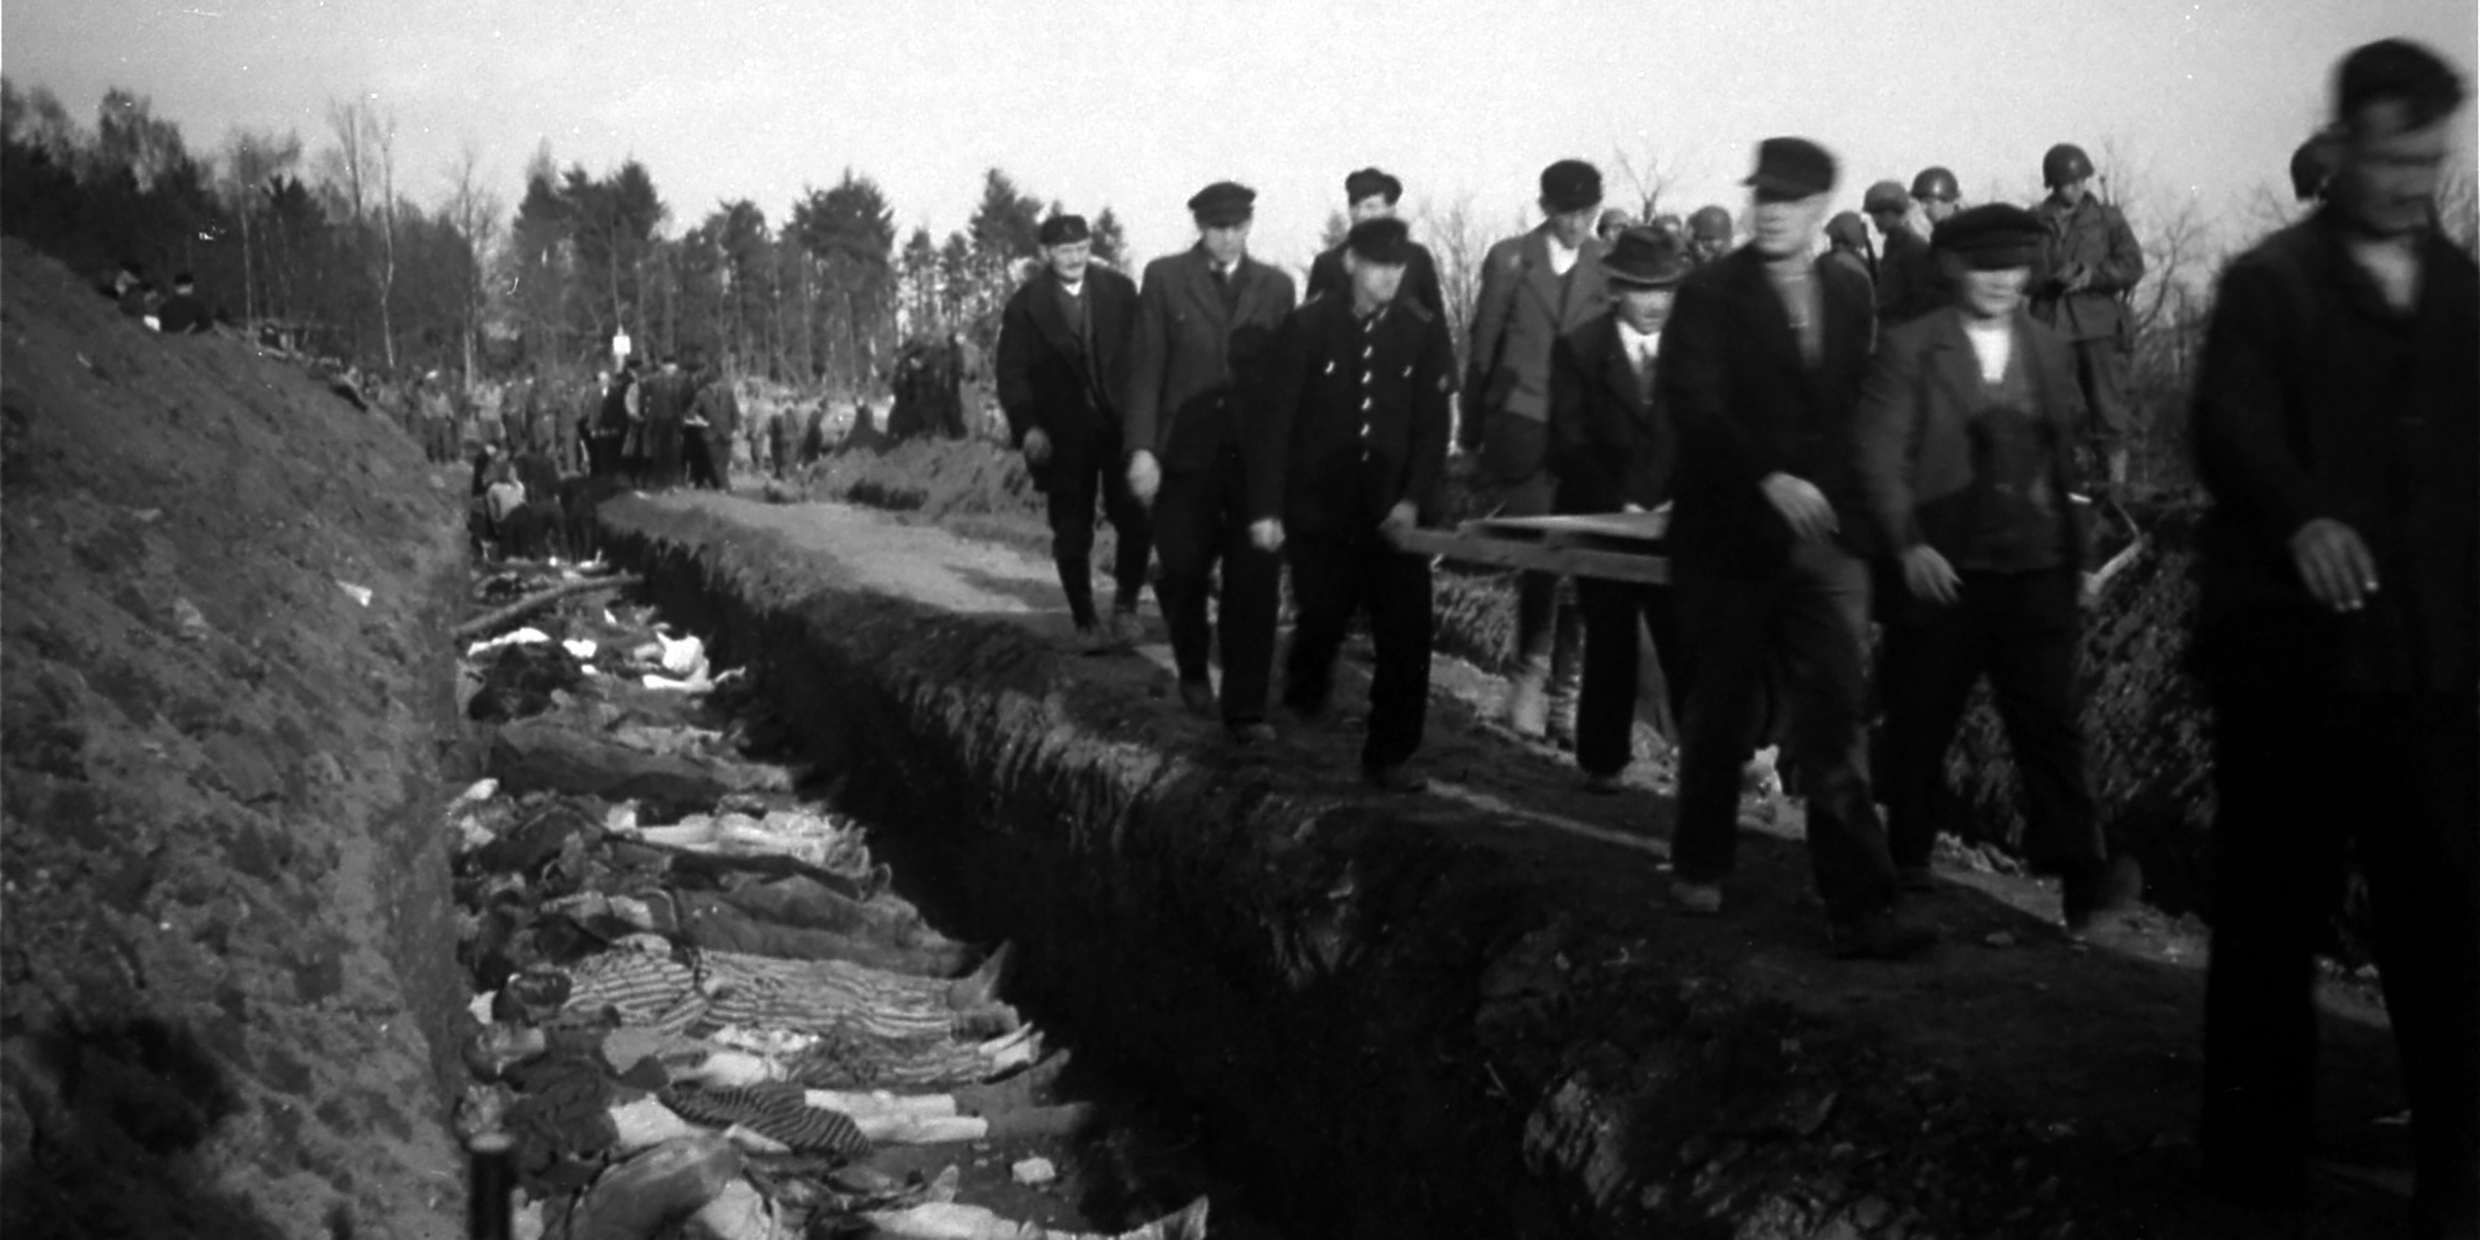 Image of German civilians walking past open mass grave filled with corpses